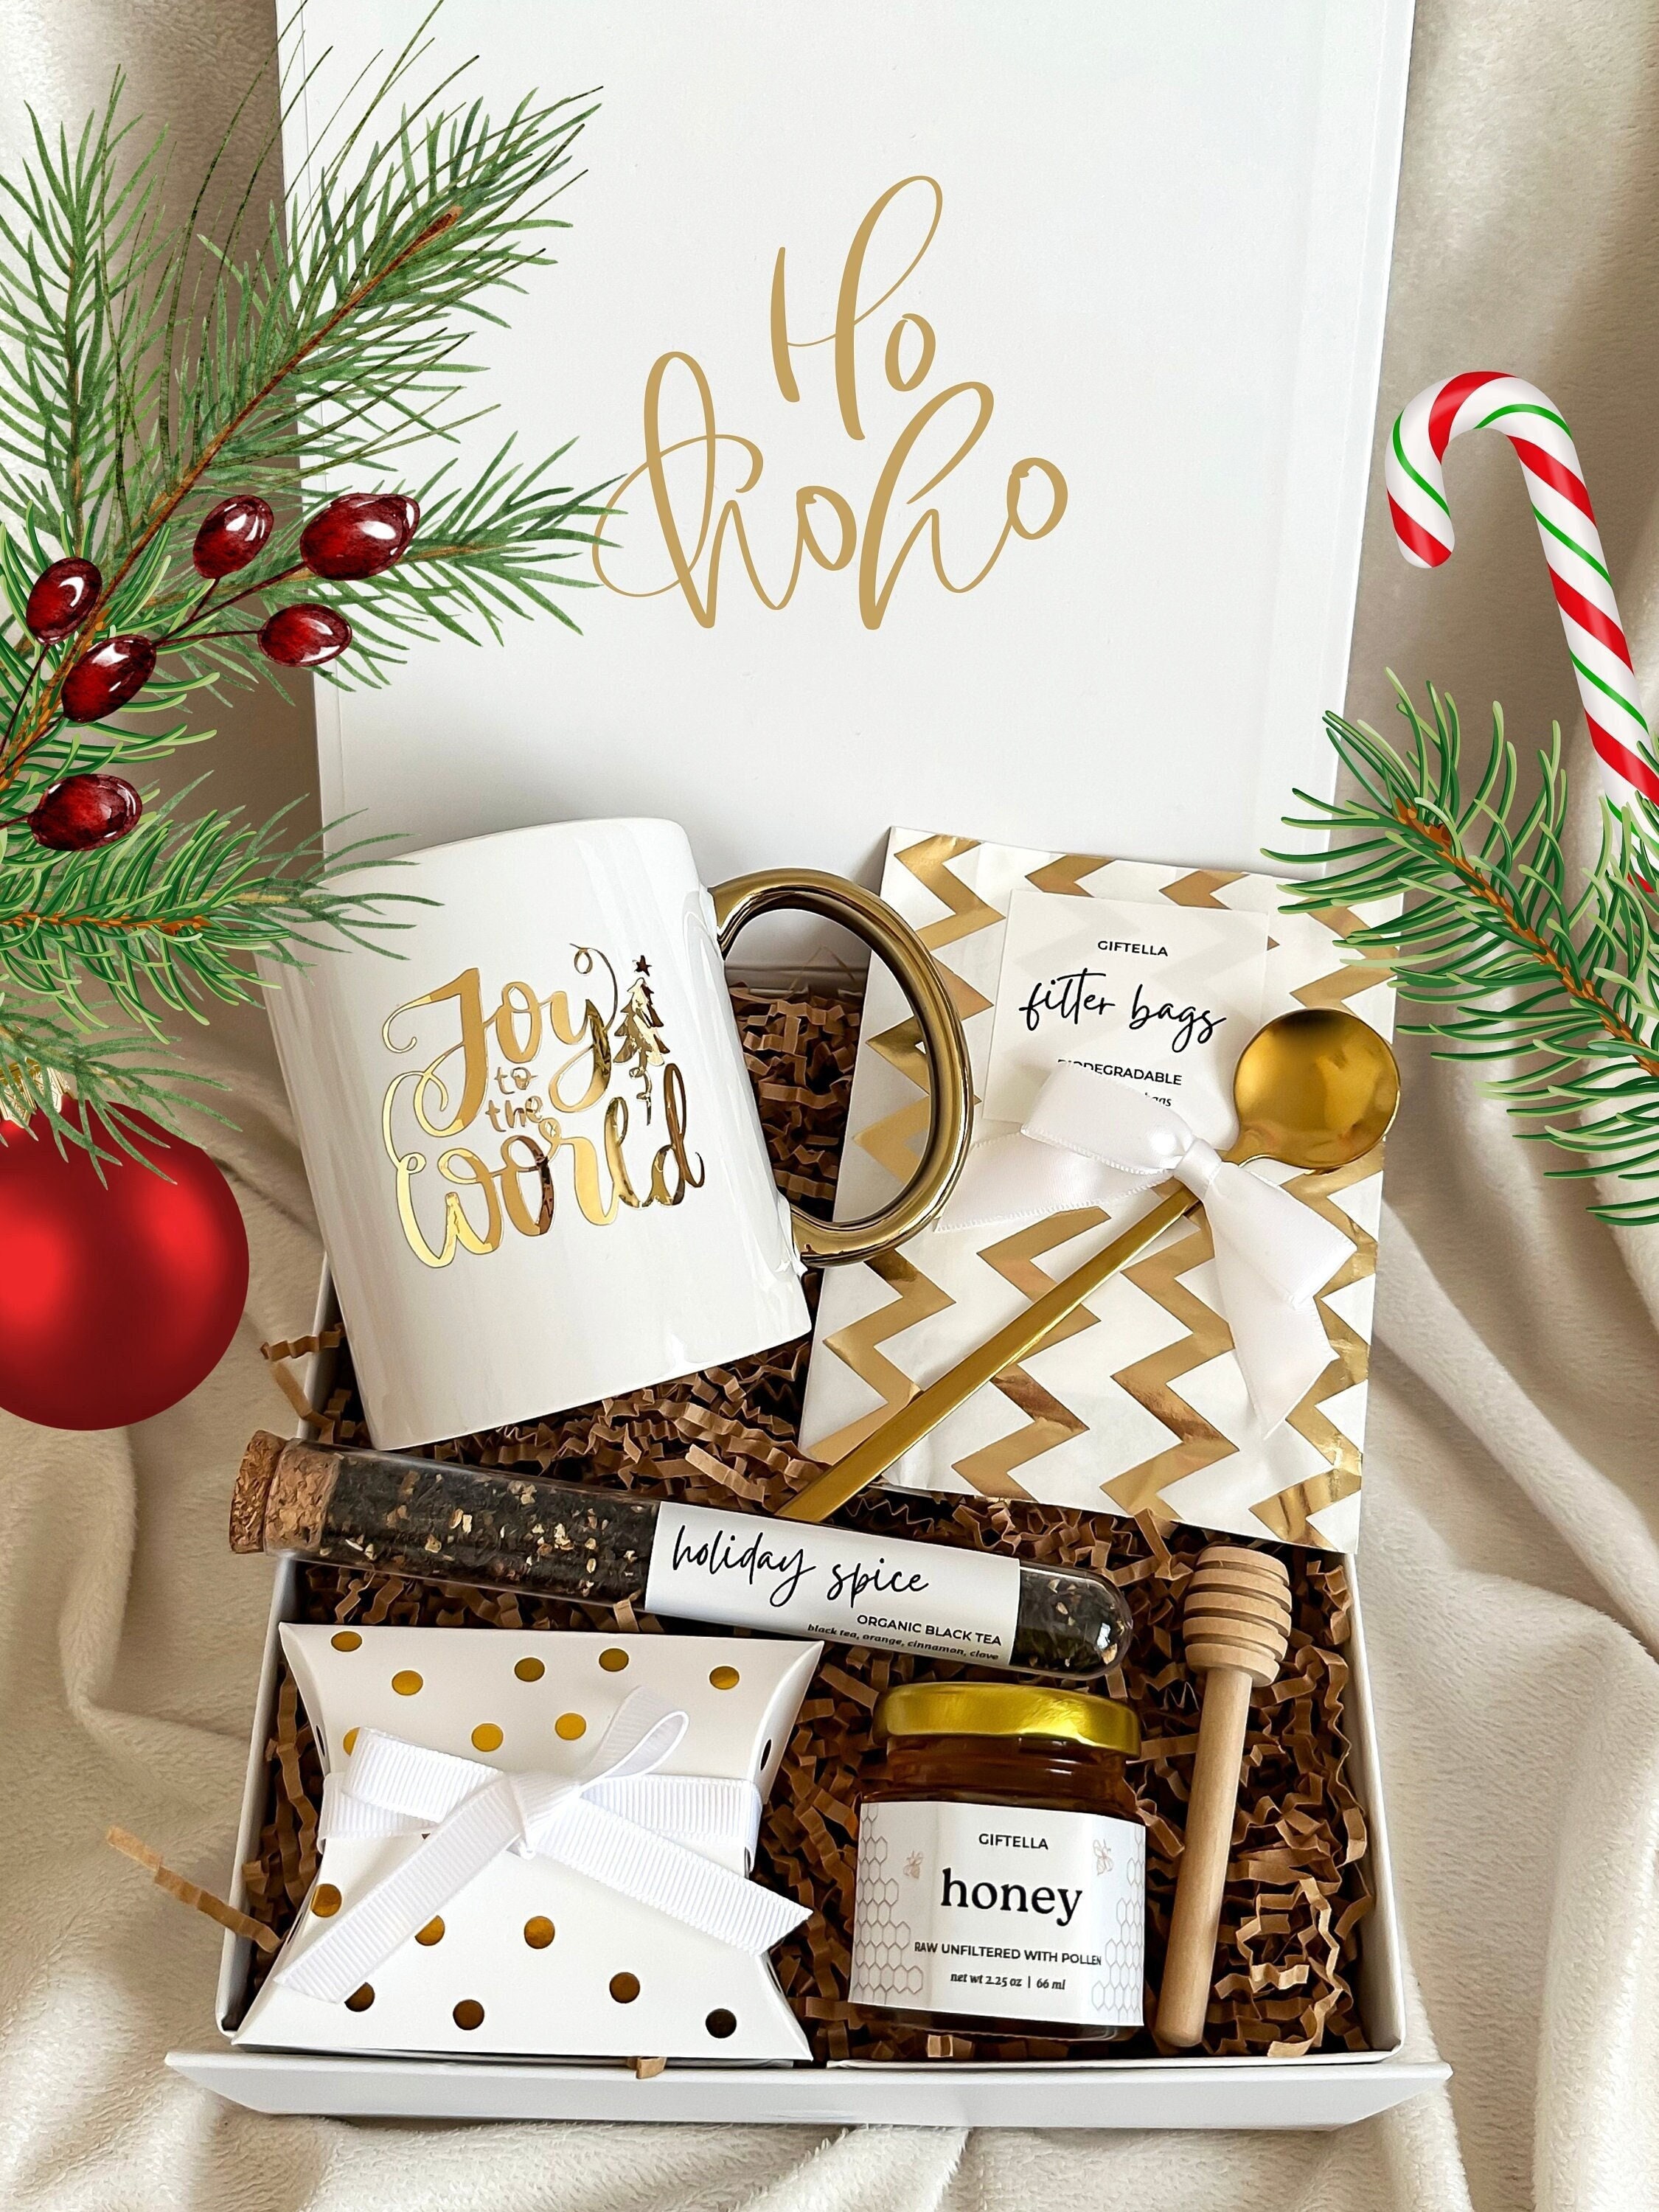  Christmas Gifts for Women, Unique Holiday Gift for Women, Her,  Mom, Wife, Girlfriend, Sister, Coworkers, Boss, Teacher, Nurse, Xmas  Tumbler Gifts Basket for Women Who Have Everything : Home & Kitchen